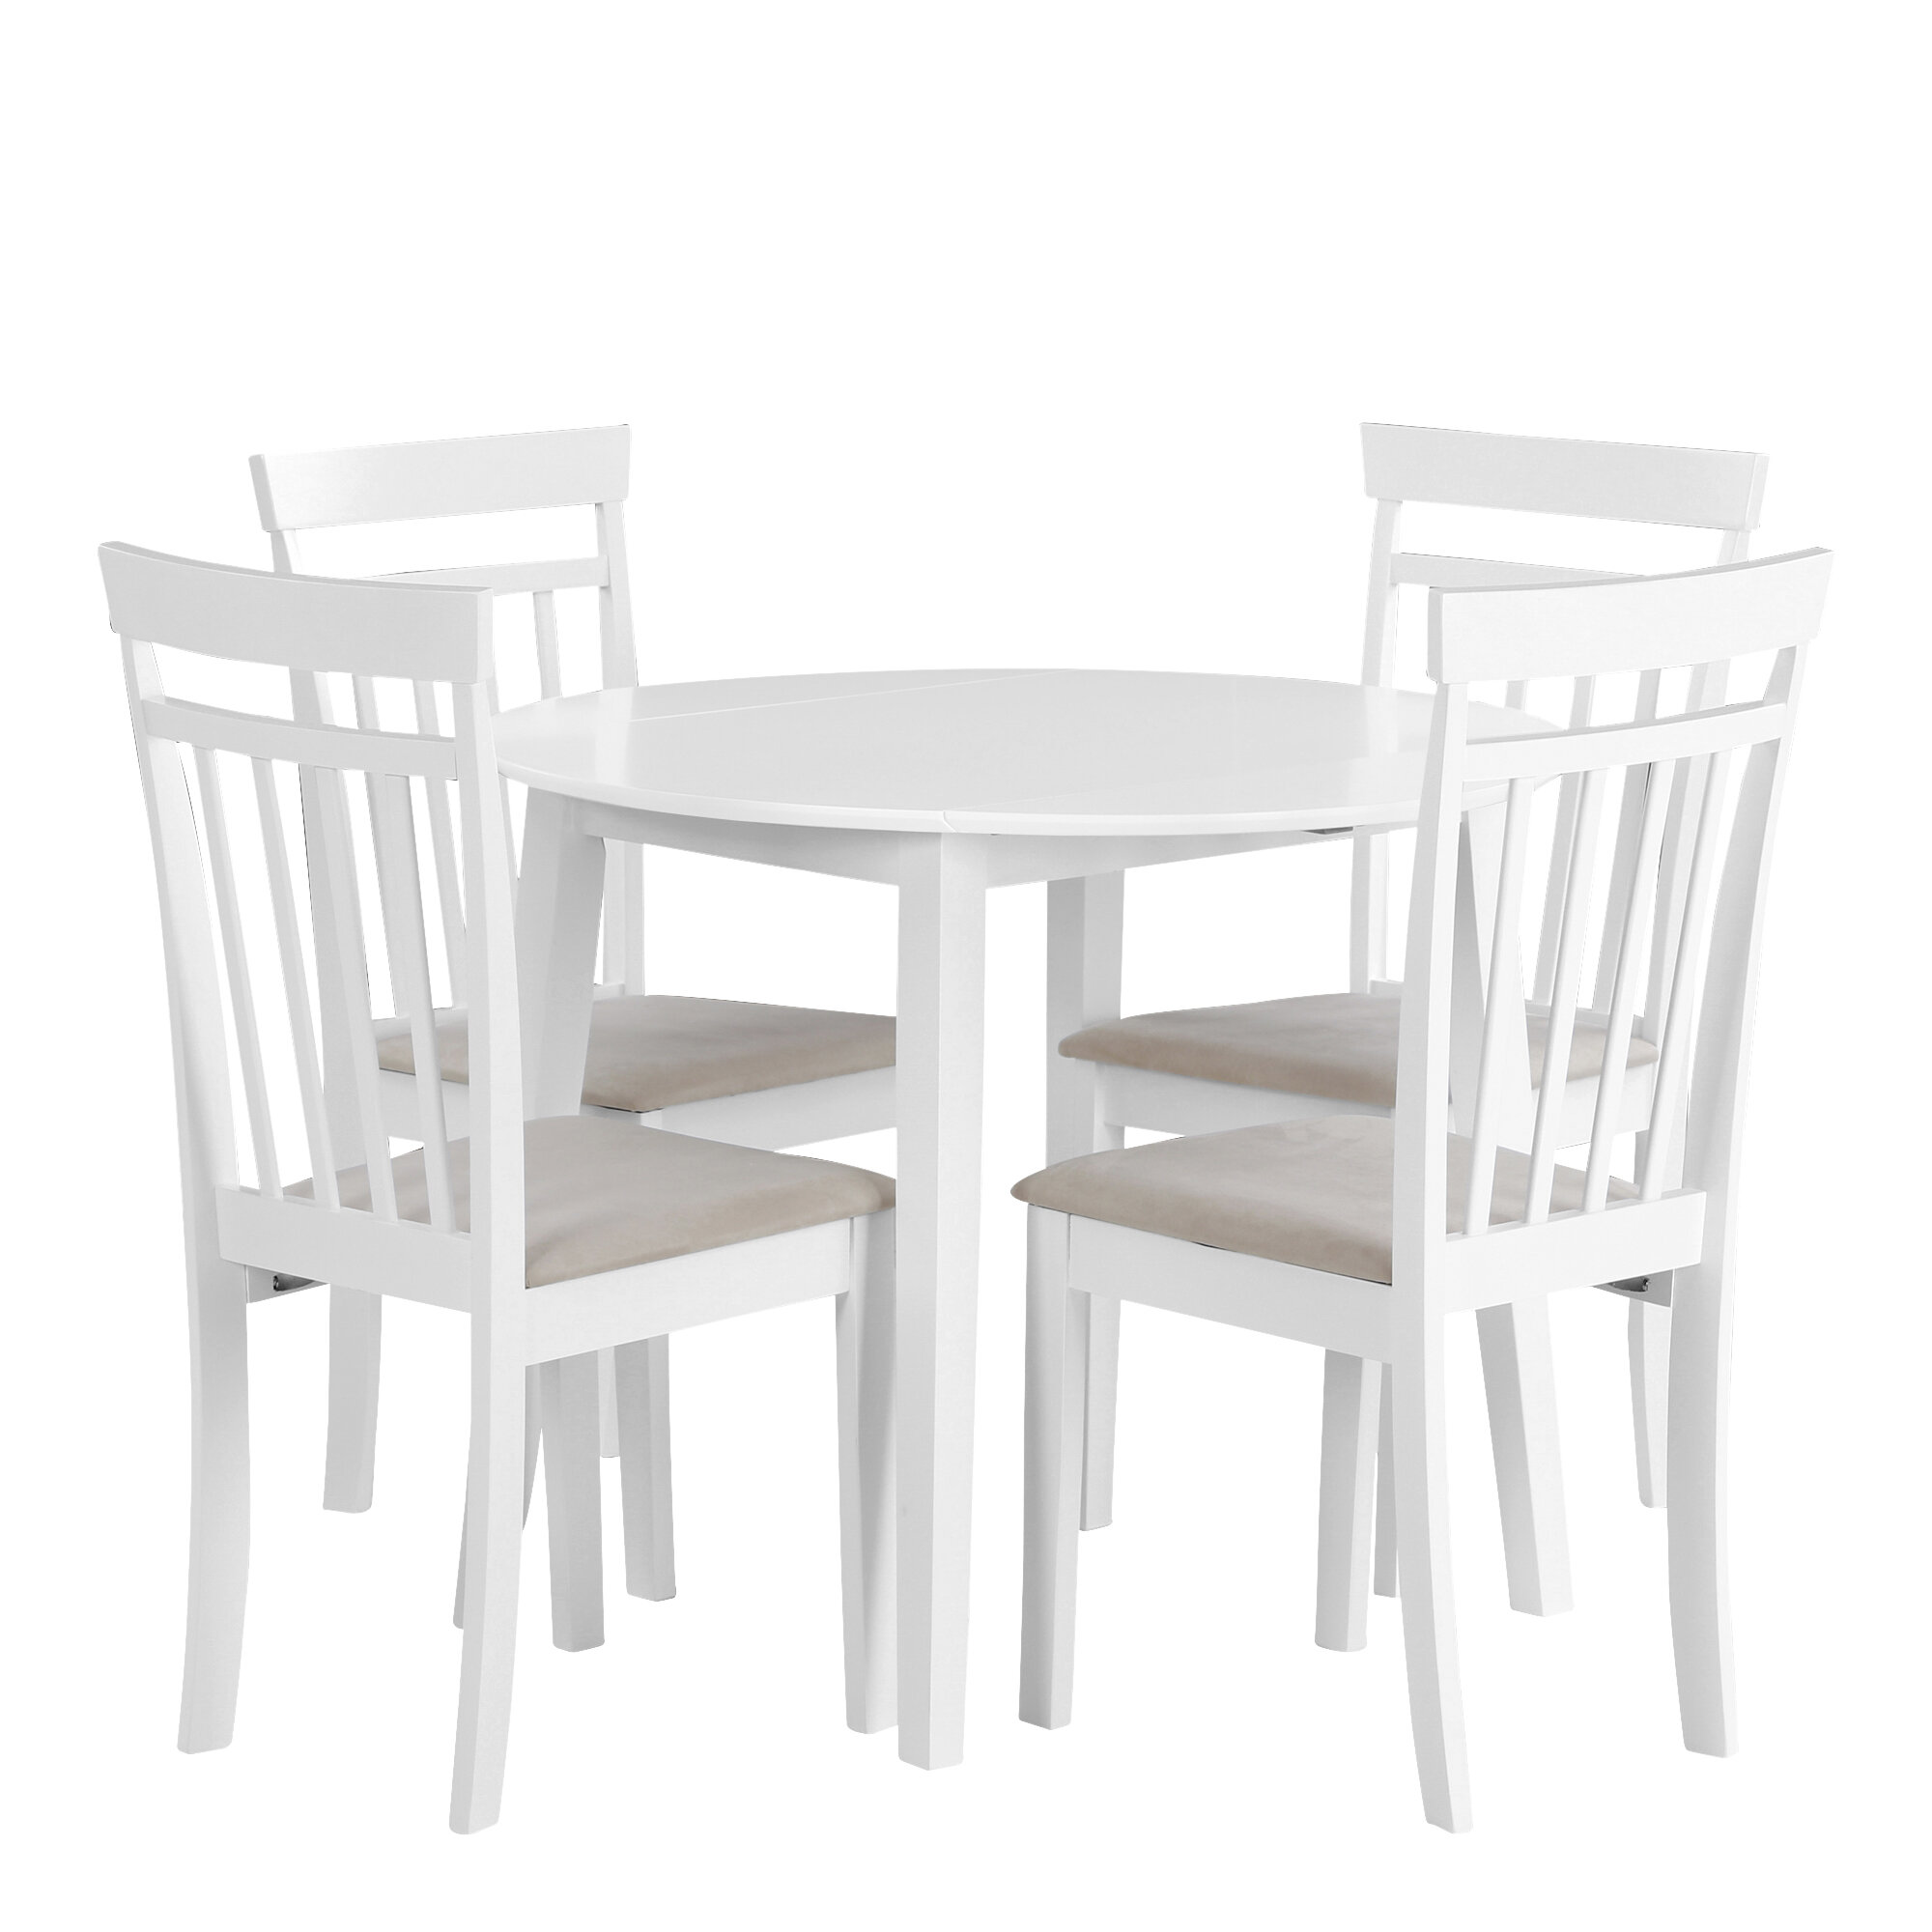 Folding Dining Table Sets Youll Love Wayfaircouk